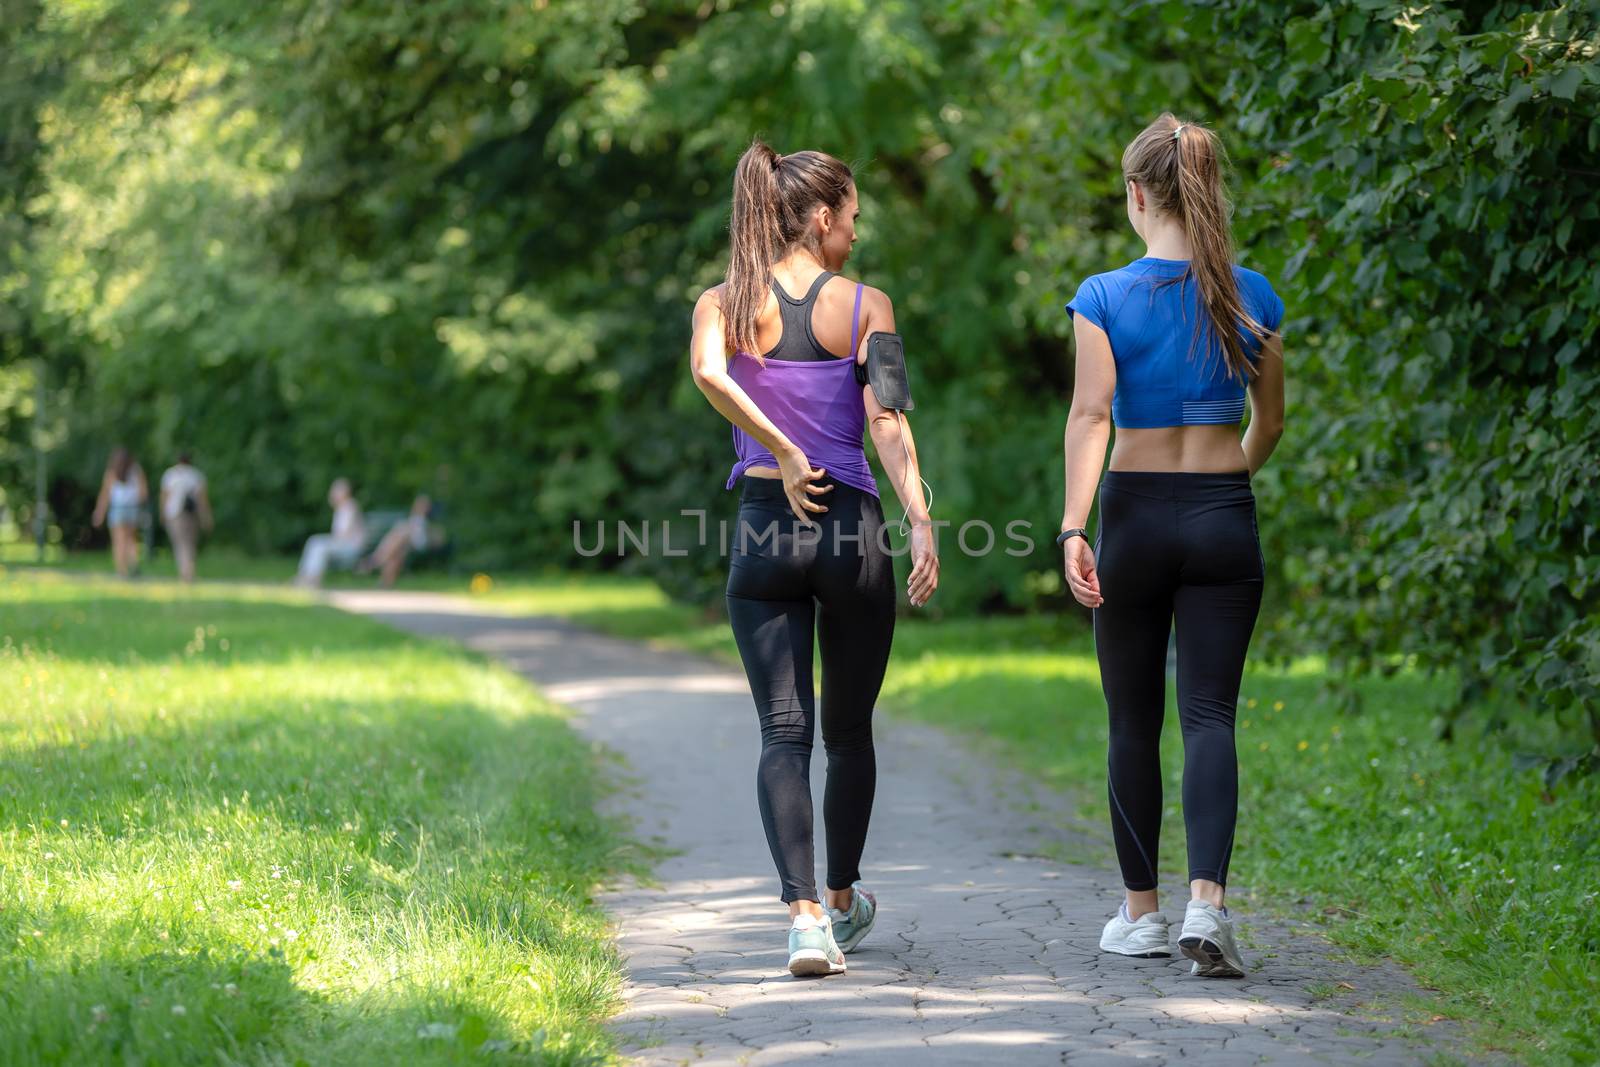 Beautiful runners in a public park by wdnet_studio